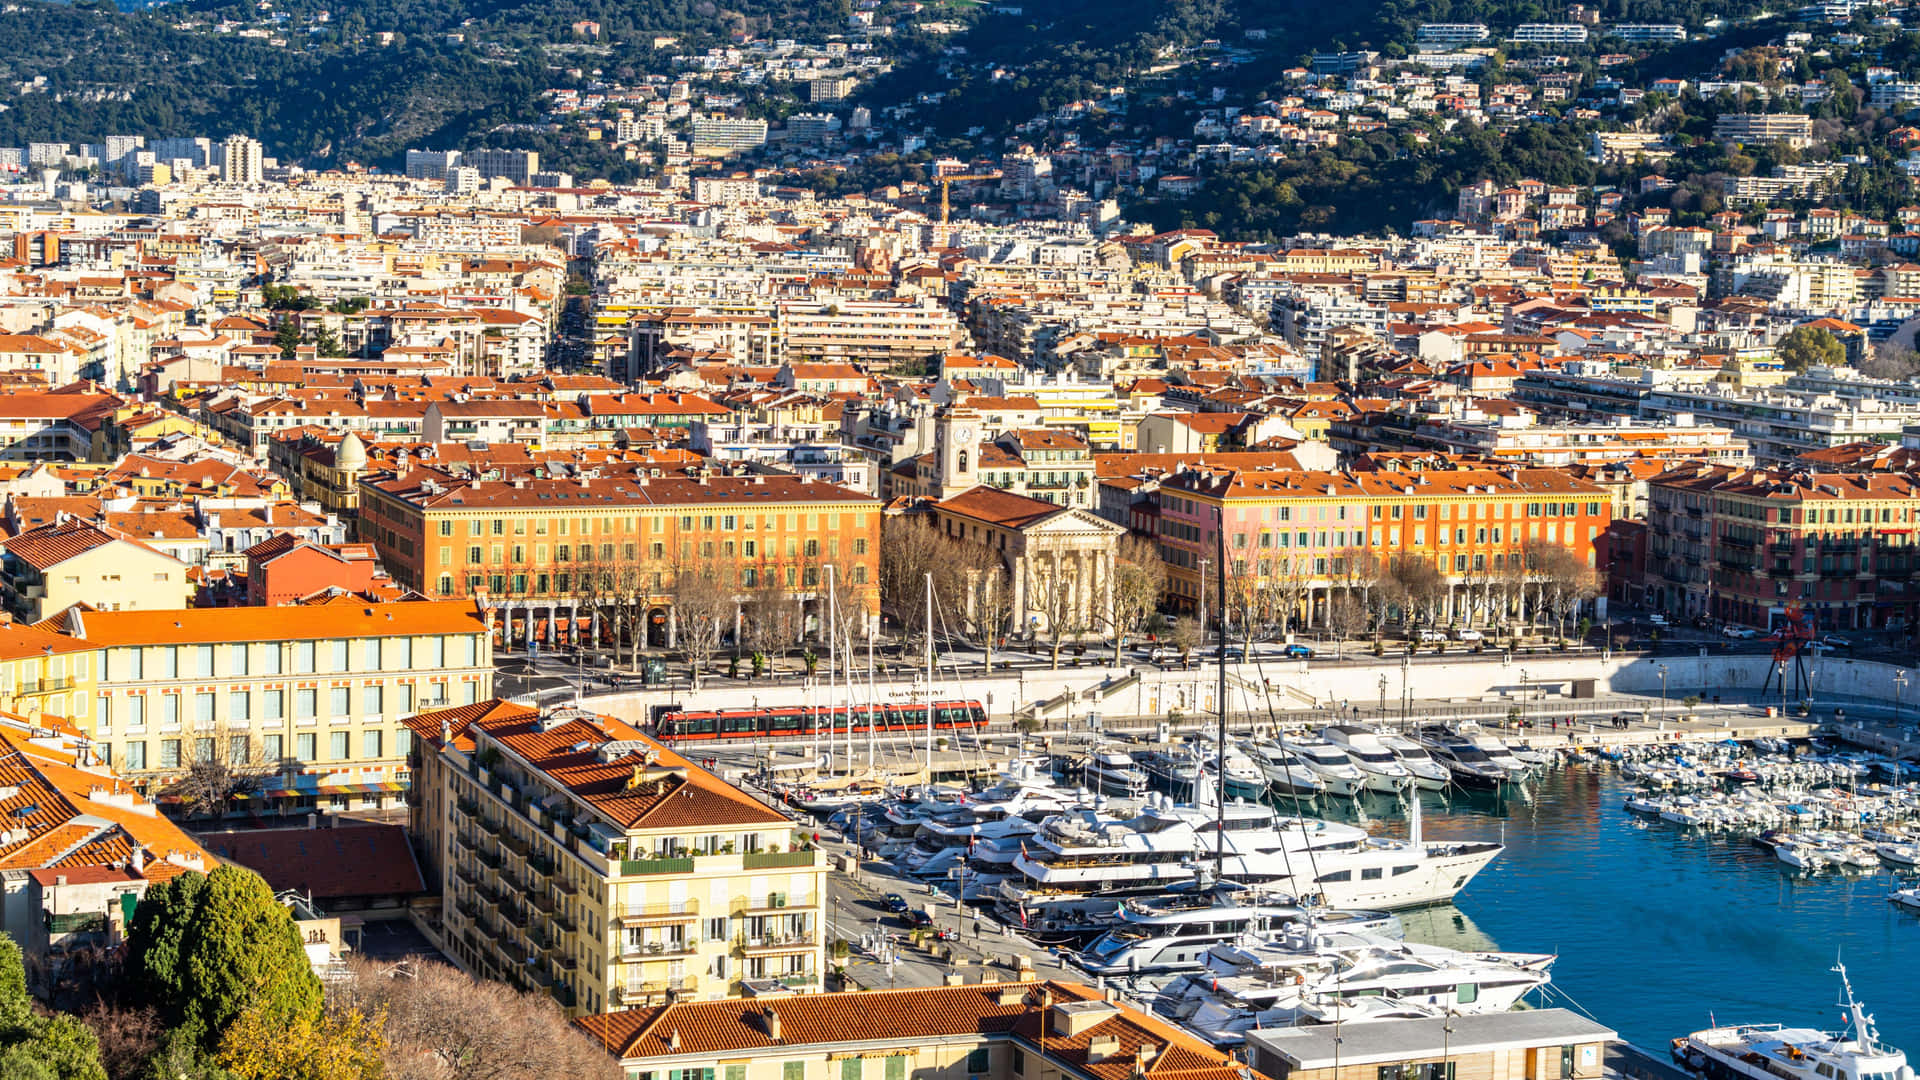 A scenic view of Nice, France